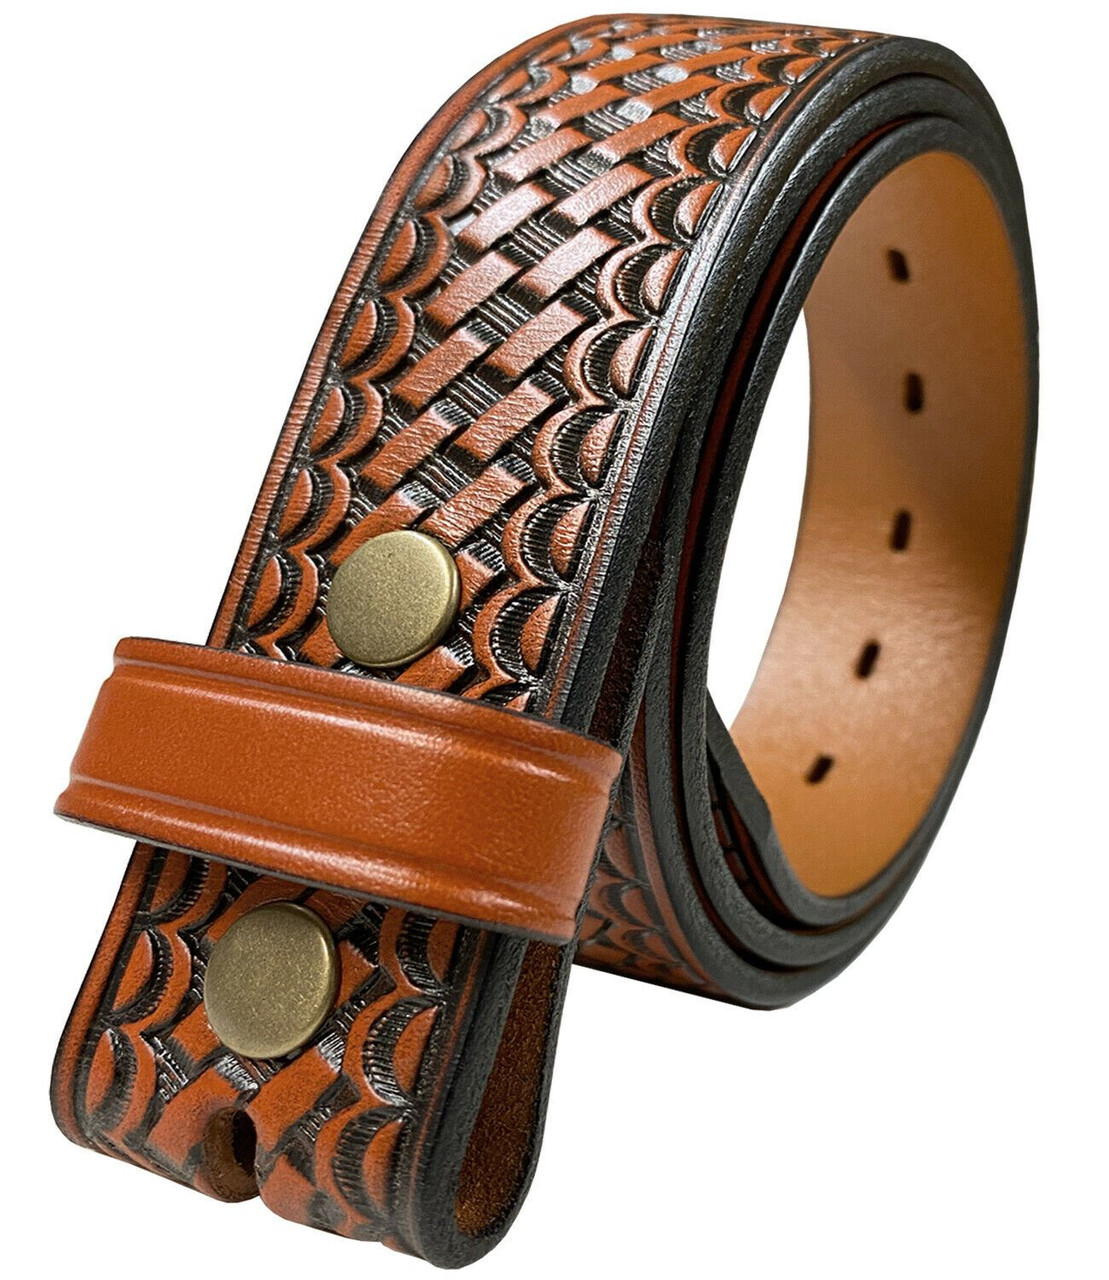 ACCESSORIES :: Classic Belts & Duty Belts :: BOSTON LEATHER - Traditional  1.5 Basketweave Belts with GOLD Buckle